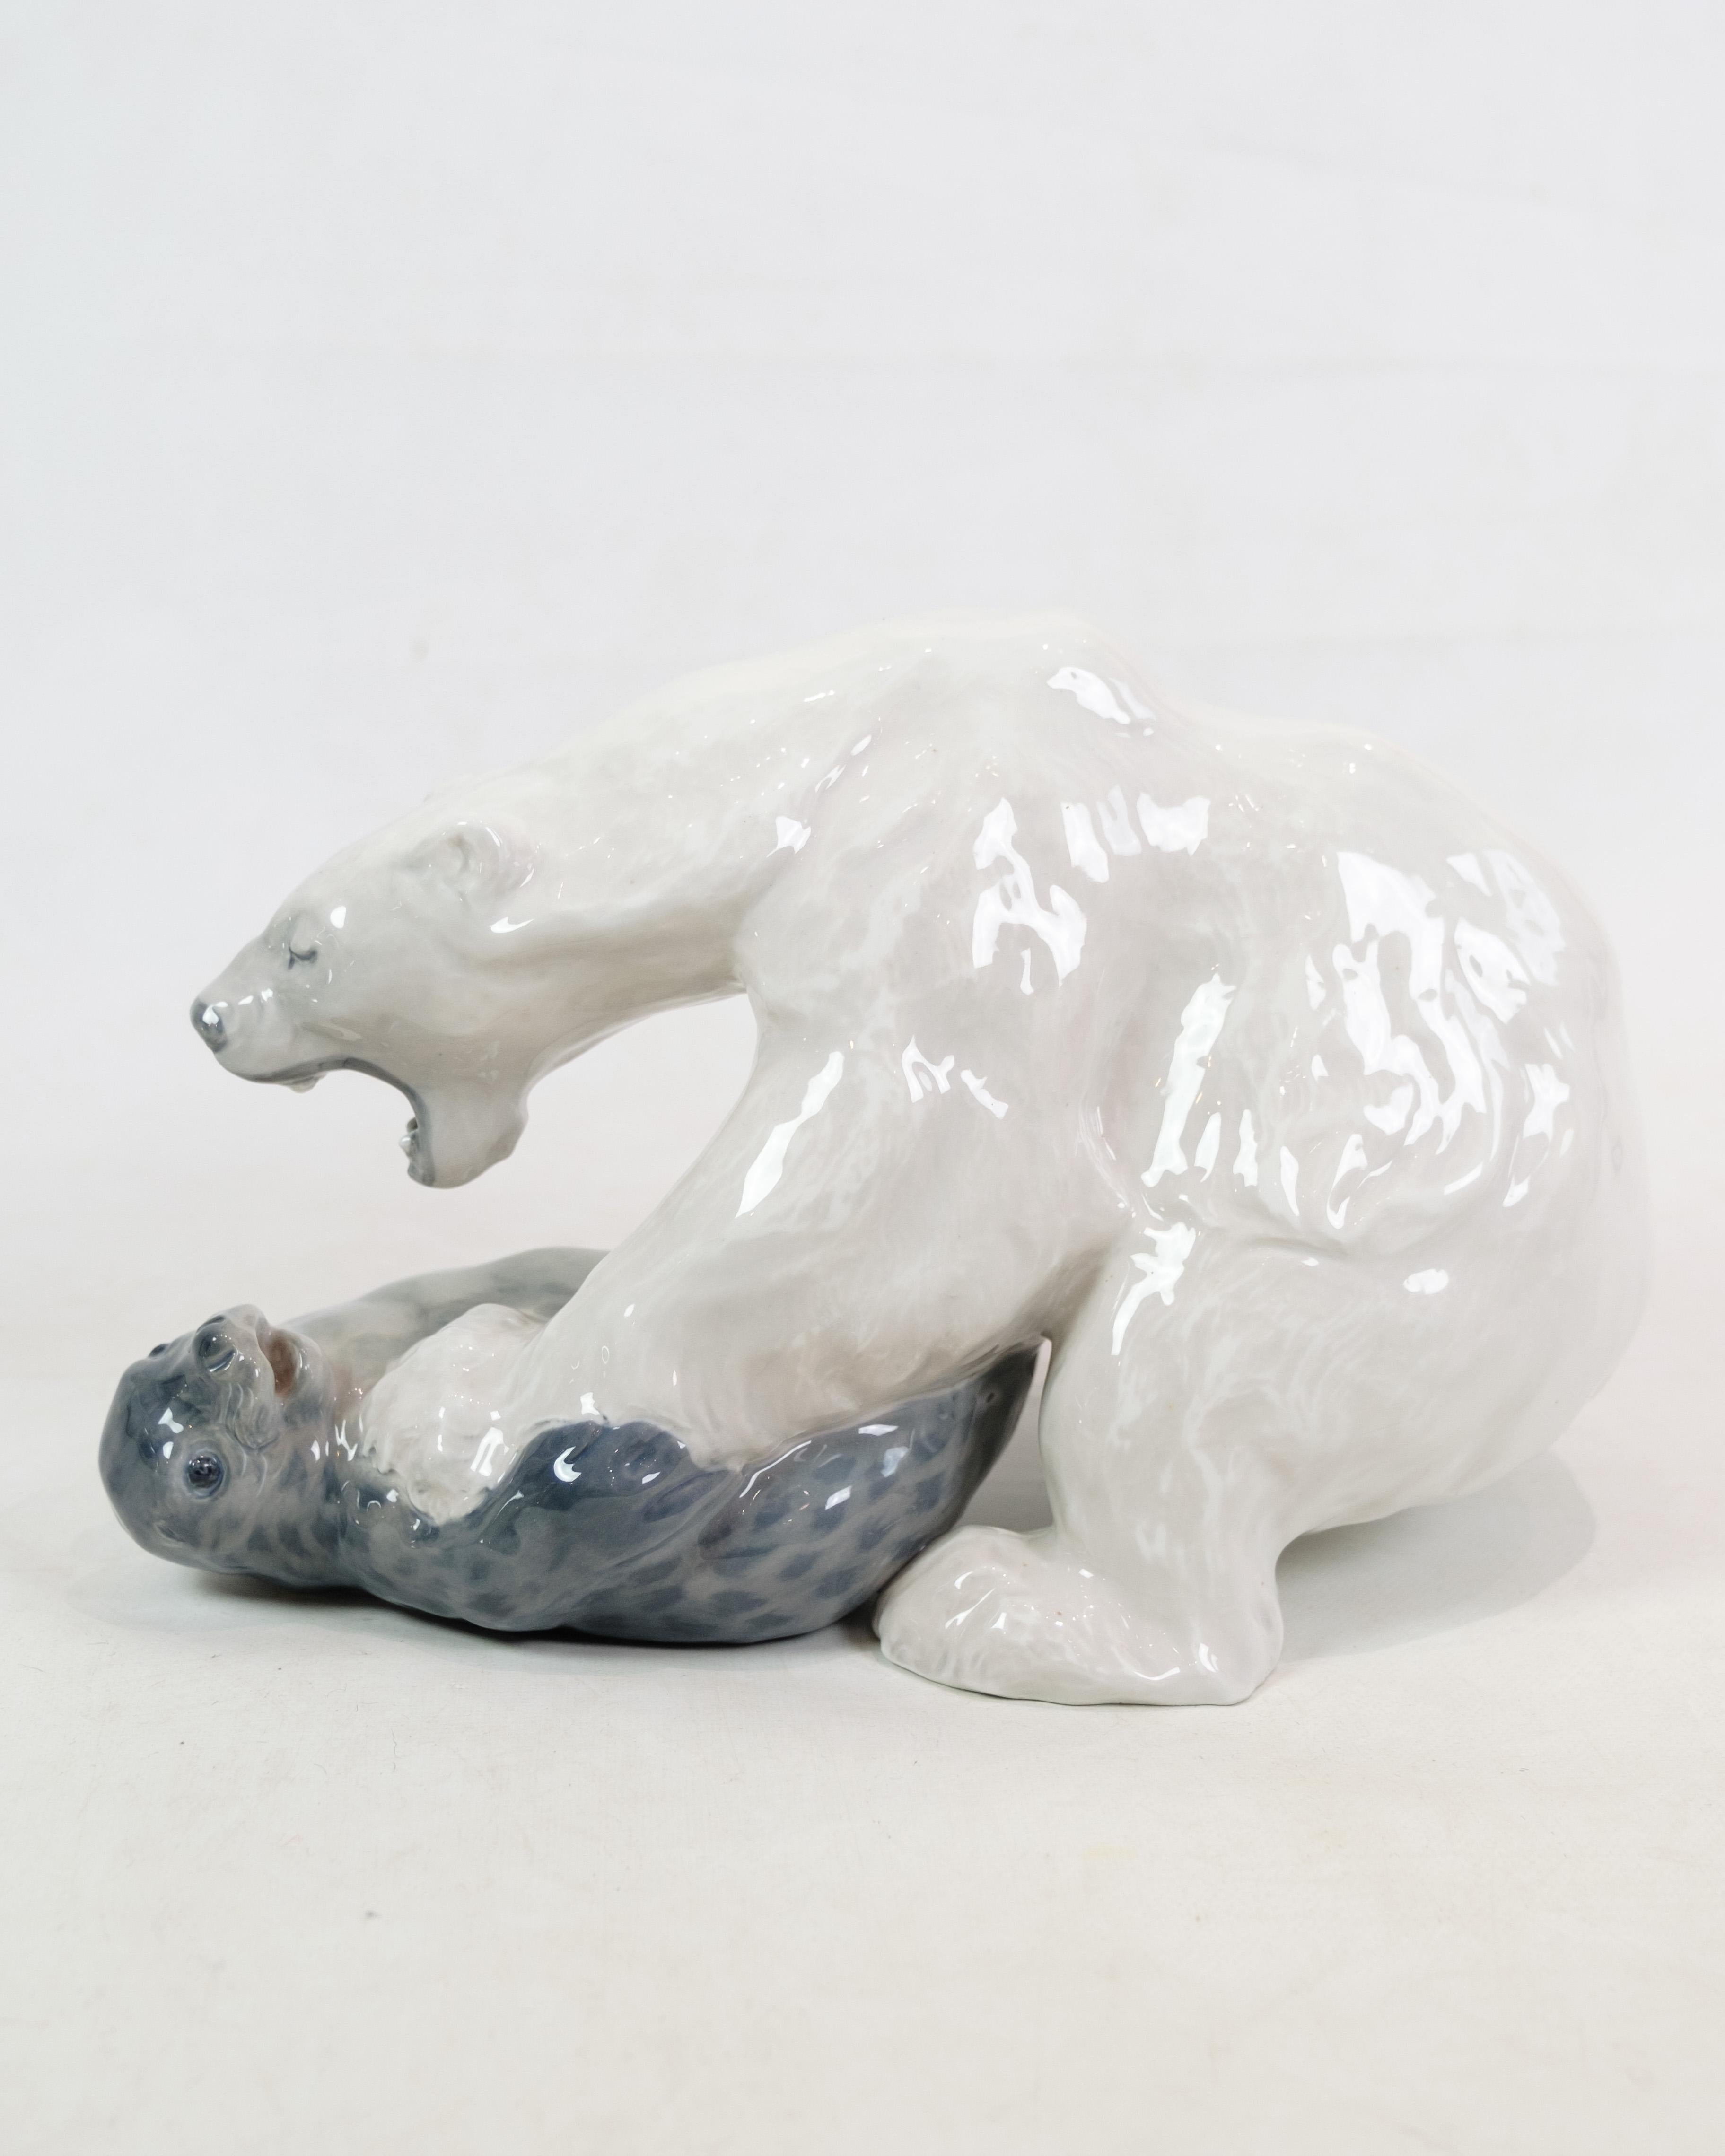 Porcelain Royal Copenhagen, Polar Bear and Seal, No. 1108, Designed by Knud Kyhn in 1909